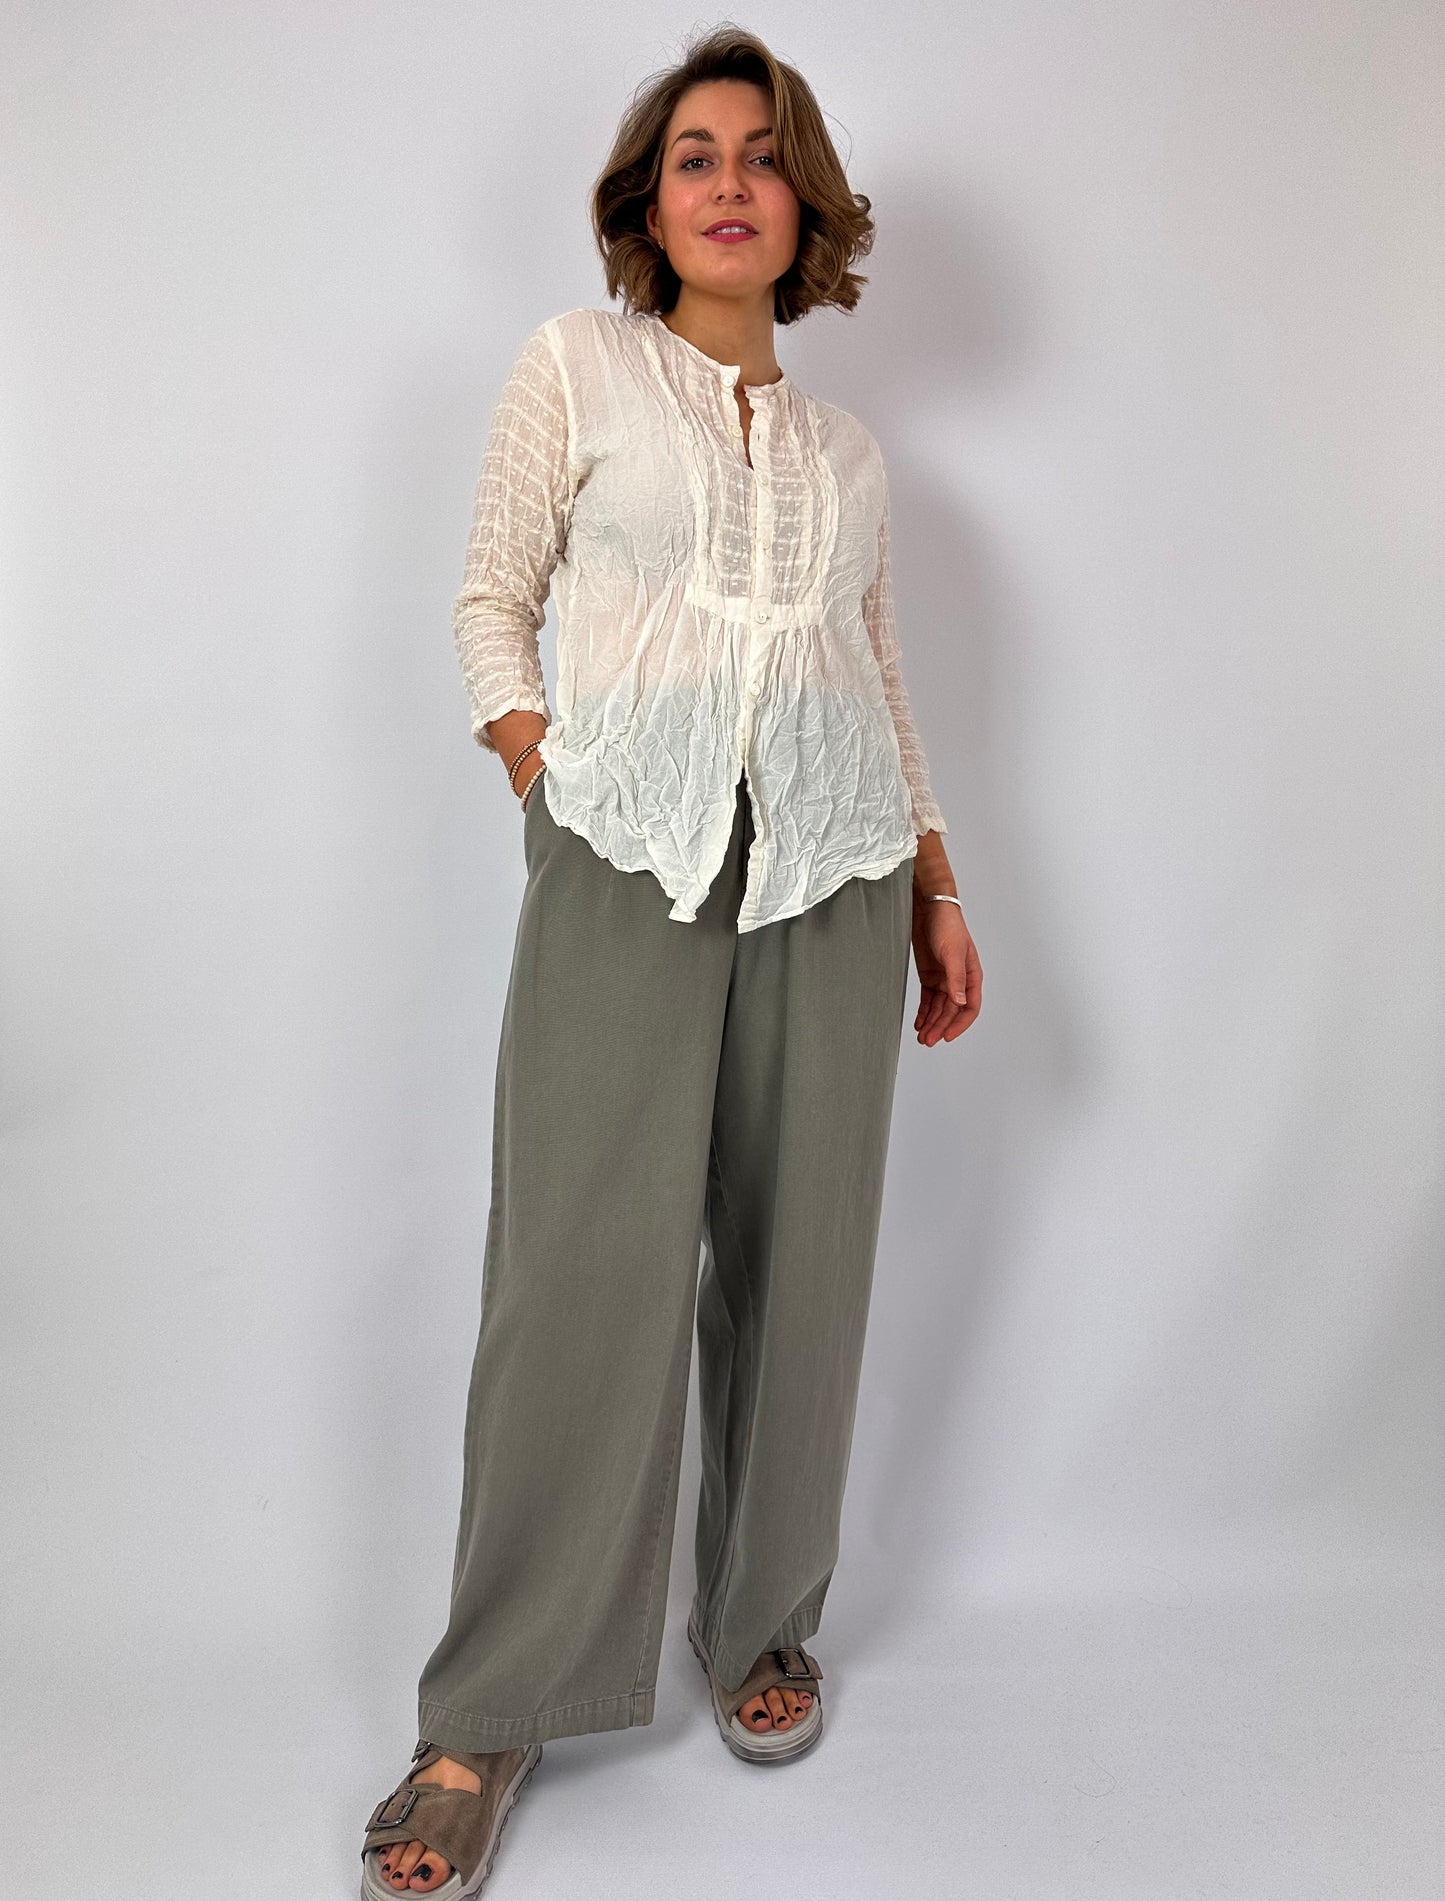 PDC 6497 Patchwork Blouse Ivory